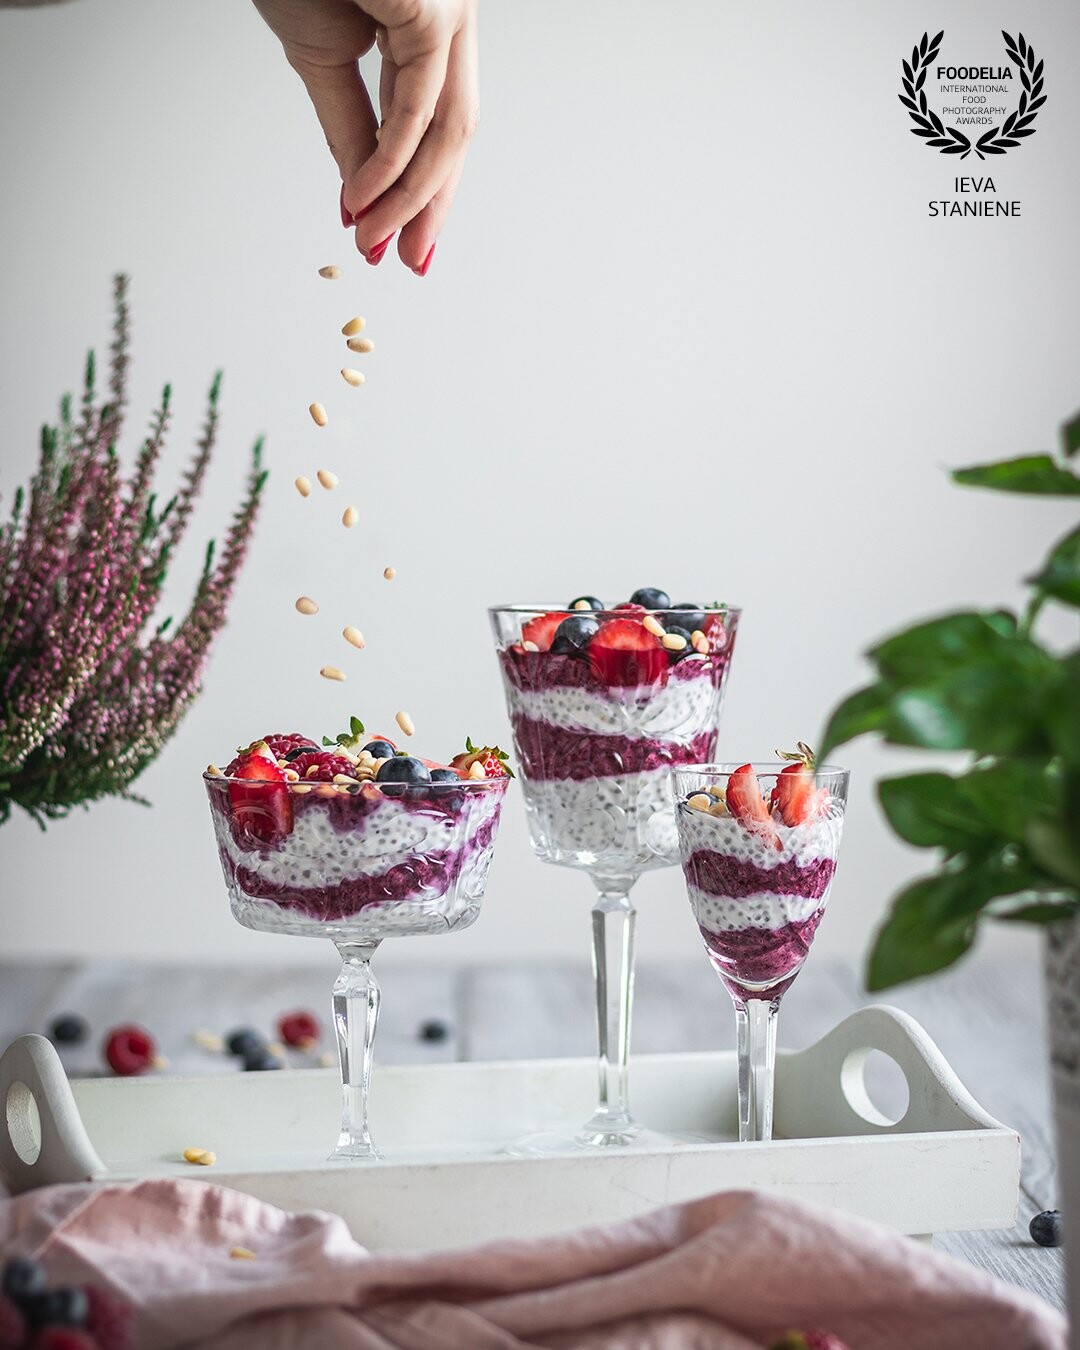 Breakfast or a dessert? This yogurt chia pudding with berries can surely be both. And it's easy to make it with frozen berries during colder months too. <br />
<br />
I wanted to capture movement sharply here to attract the attention to all those pine nuts, which gave texture and interesting taste to the dish.